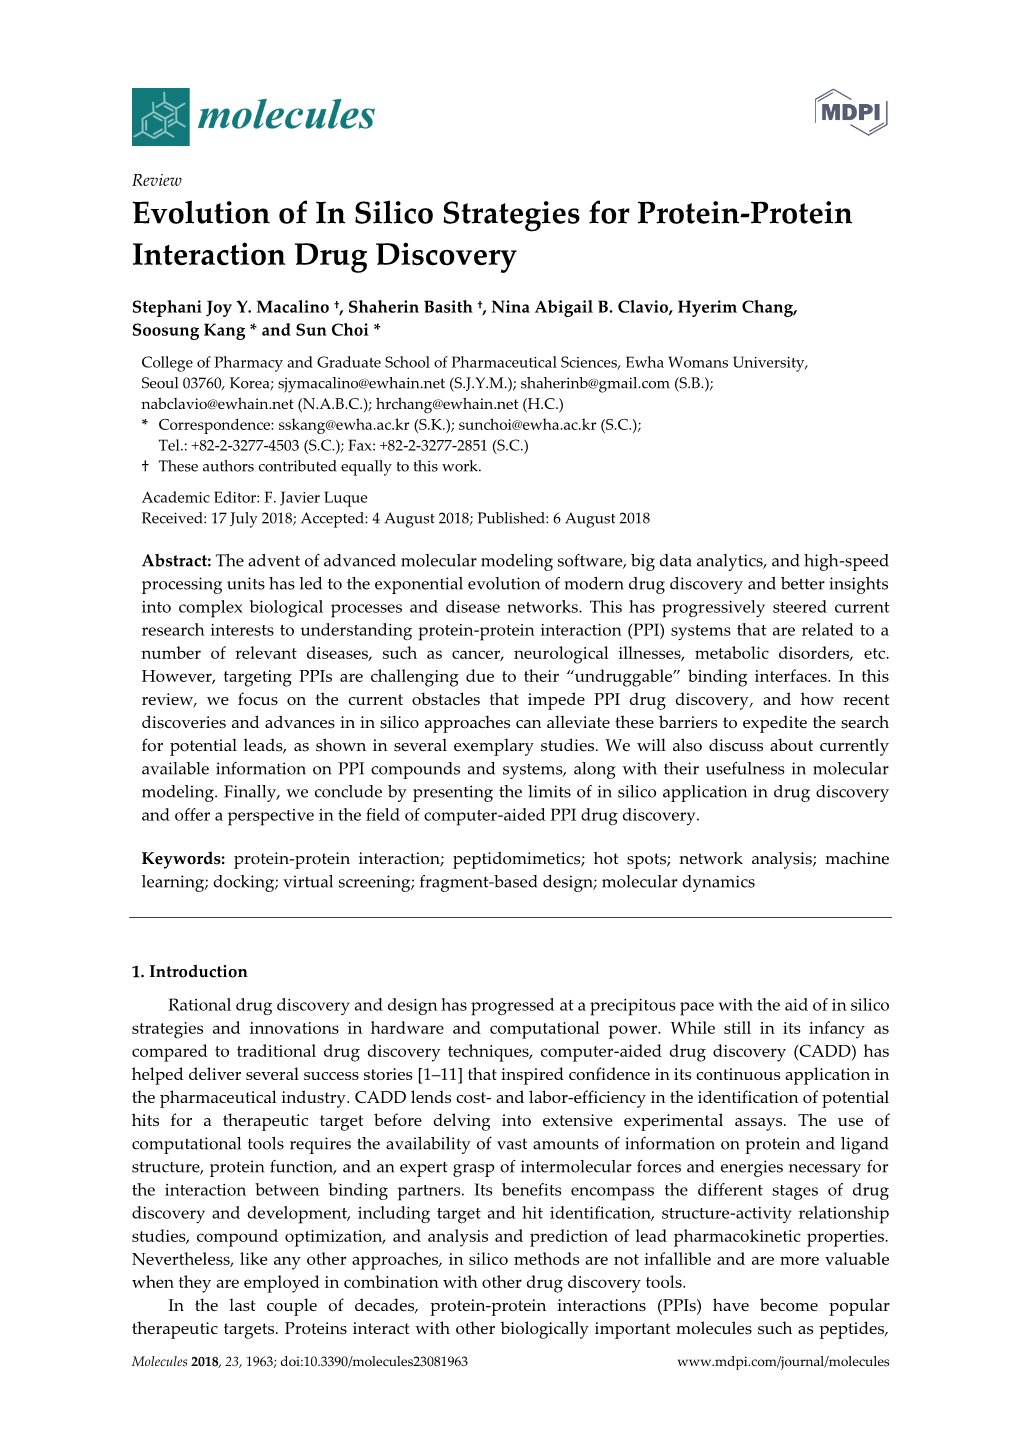 Evolution of in Silico Strategies for Protein-Protein Interaction Drug Discovery